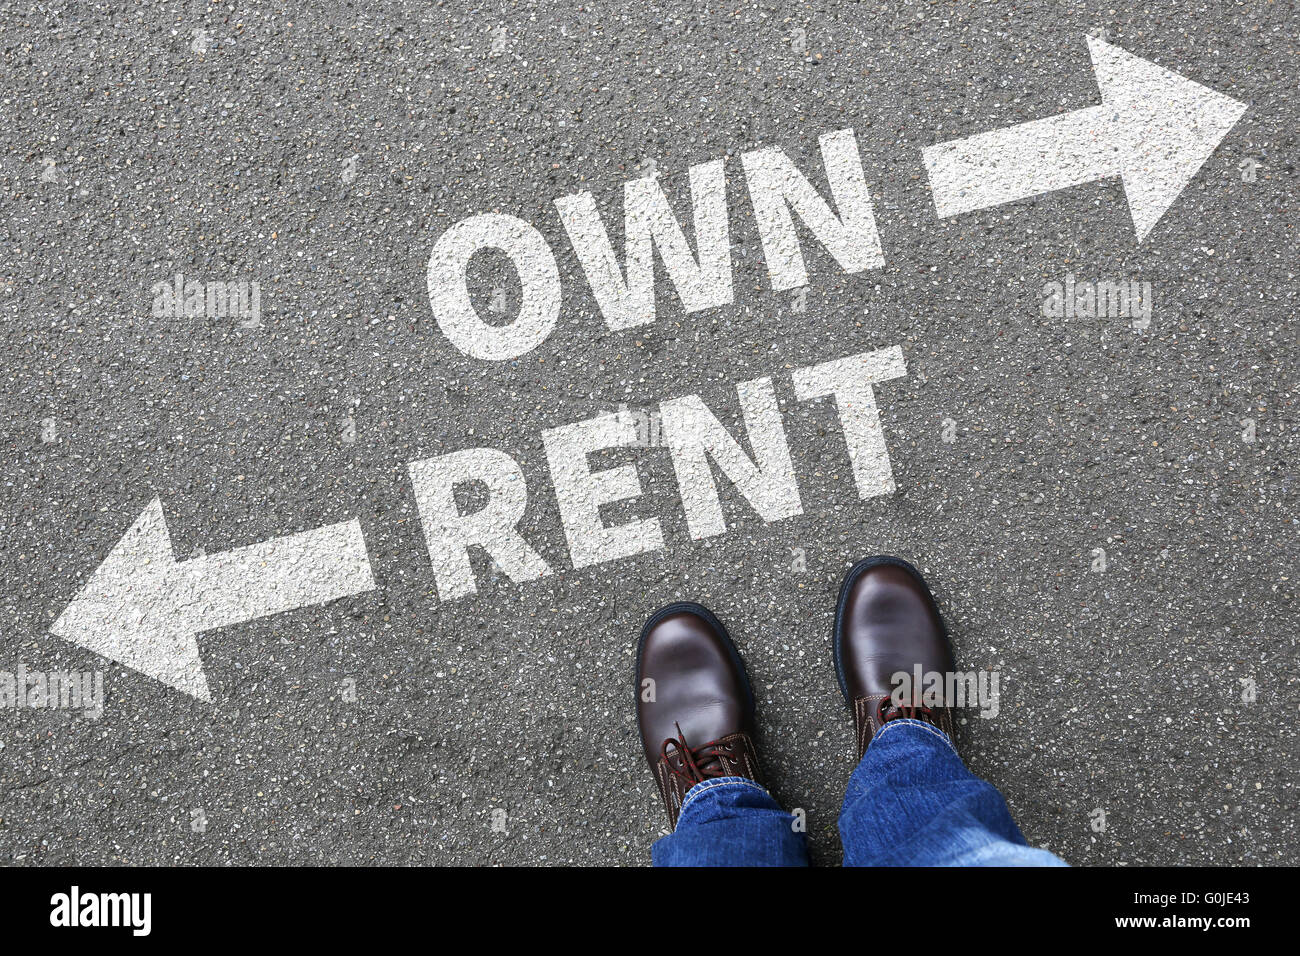 Rent or own ownership purchase real estate house apartment concept decision Stock Photo